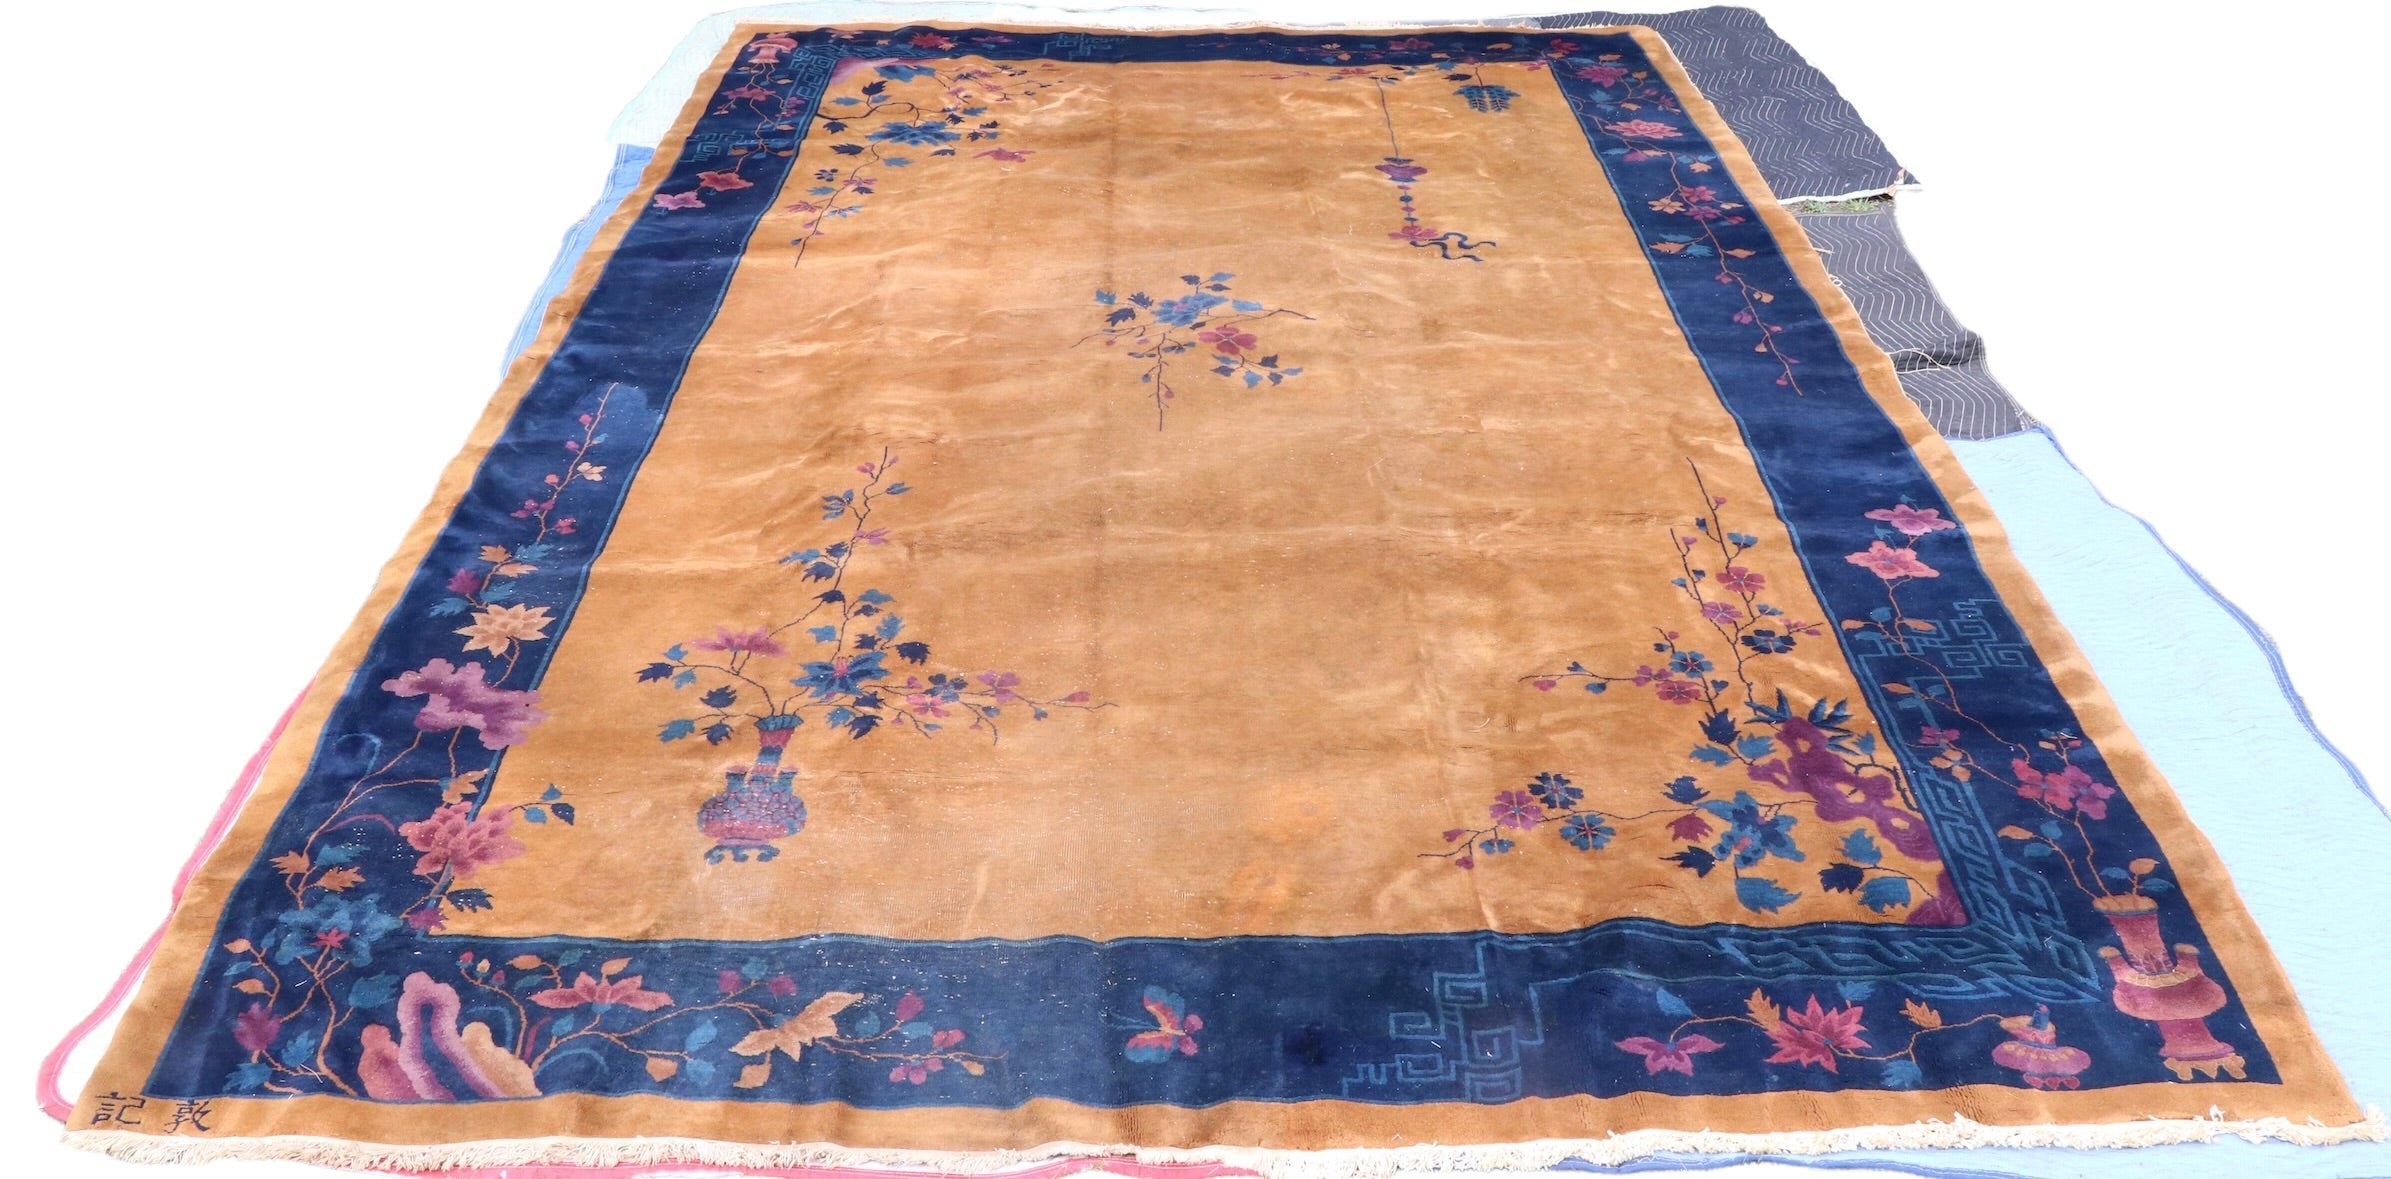  Palace Size Chinese Art Deco Rug att. to Walter Nichols ca. 1920/1930's For Sale